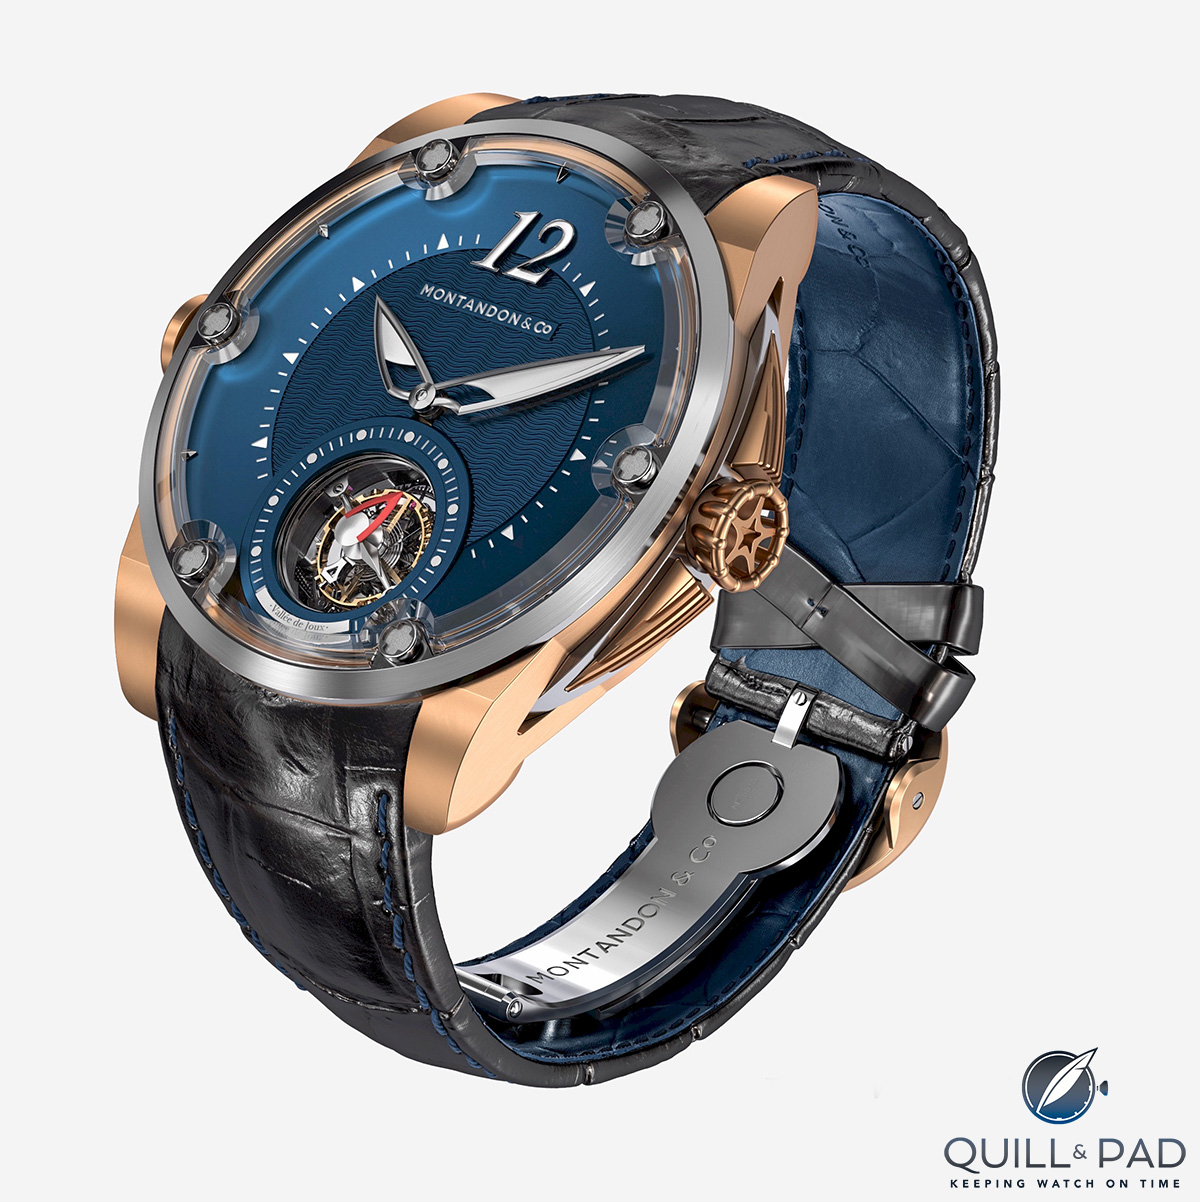 Montandon Windward in electro-stable bronze with blue dial